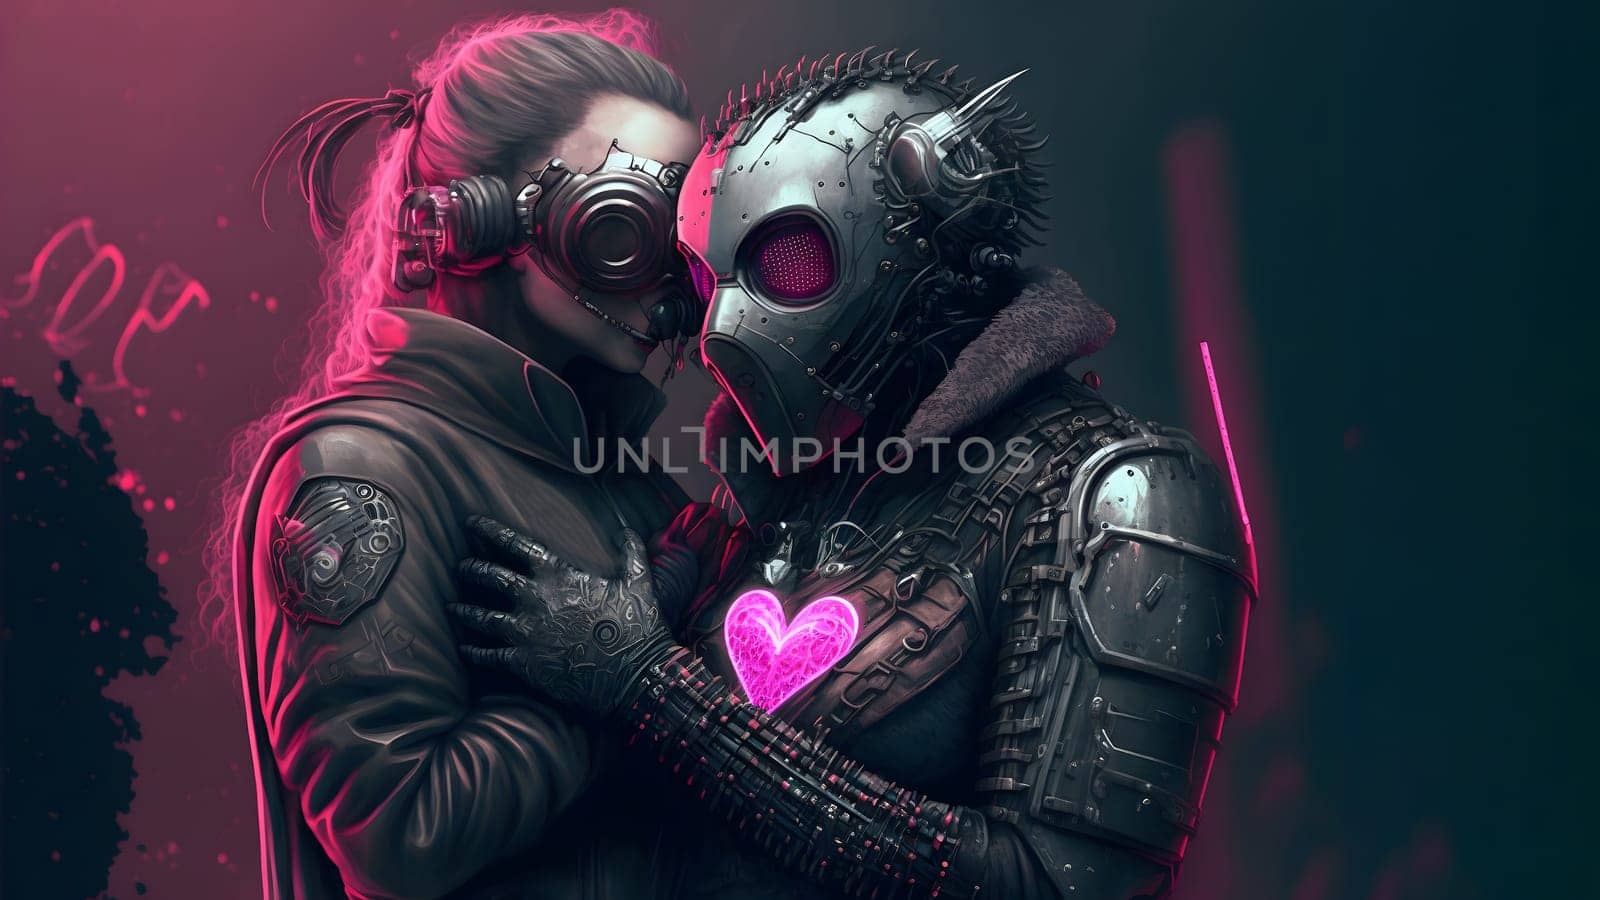 two people in love hugging in dark environment, cyberpunk style, neural network generated art. Digitally generated image. Not based on any actual person, scene or pattern.